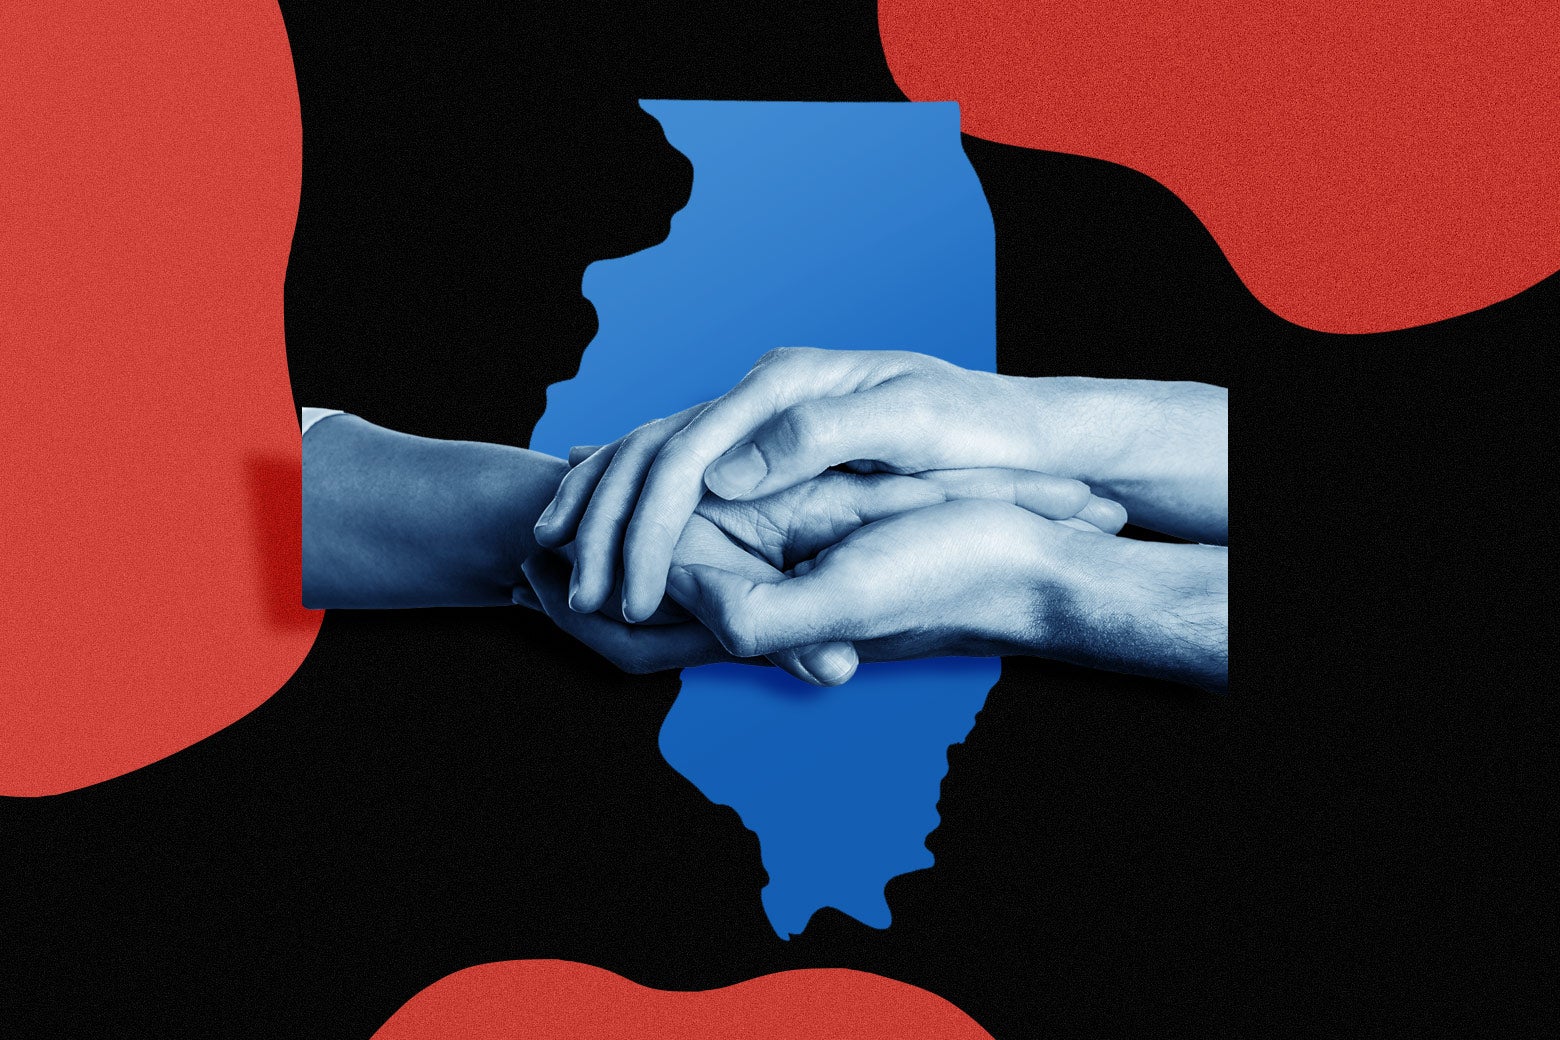 Holding hands in front of a map of Illinois